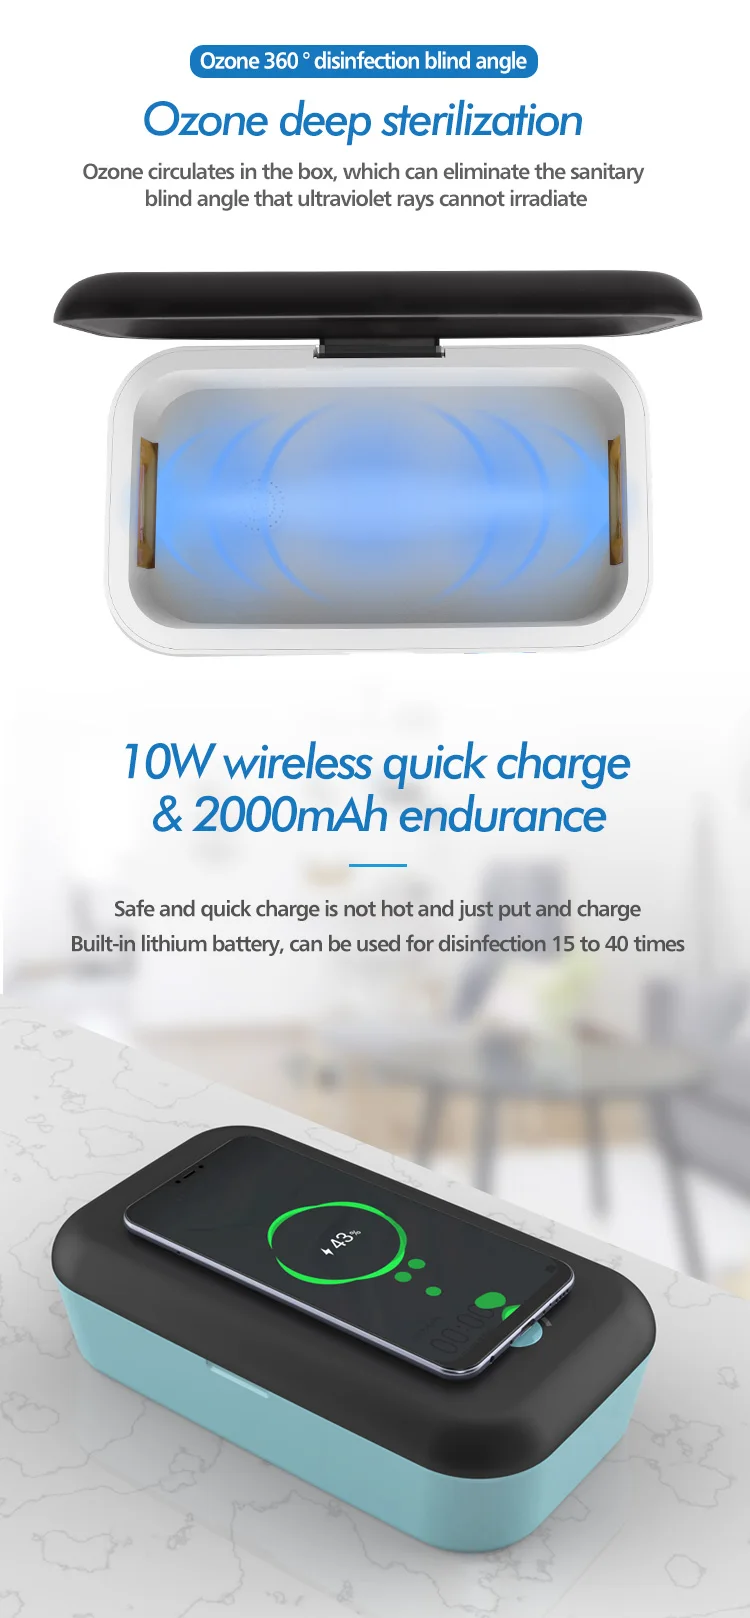 smartphone wireless charger box03